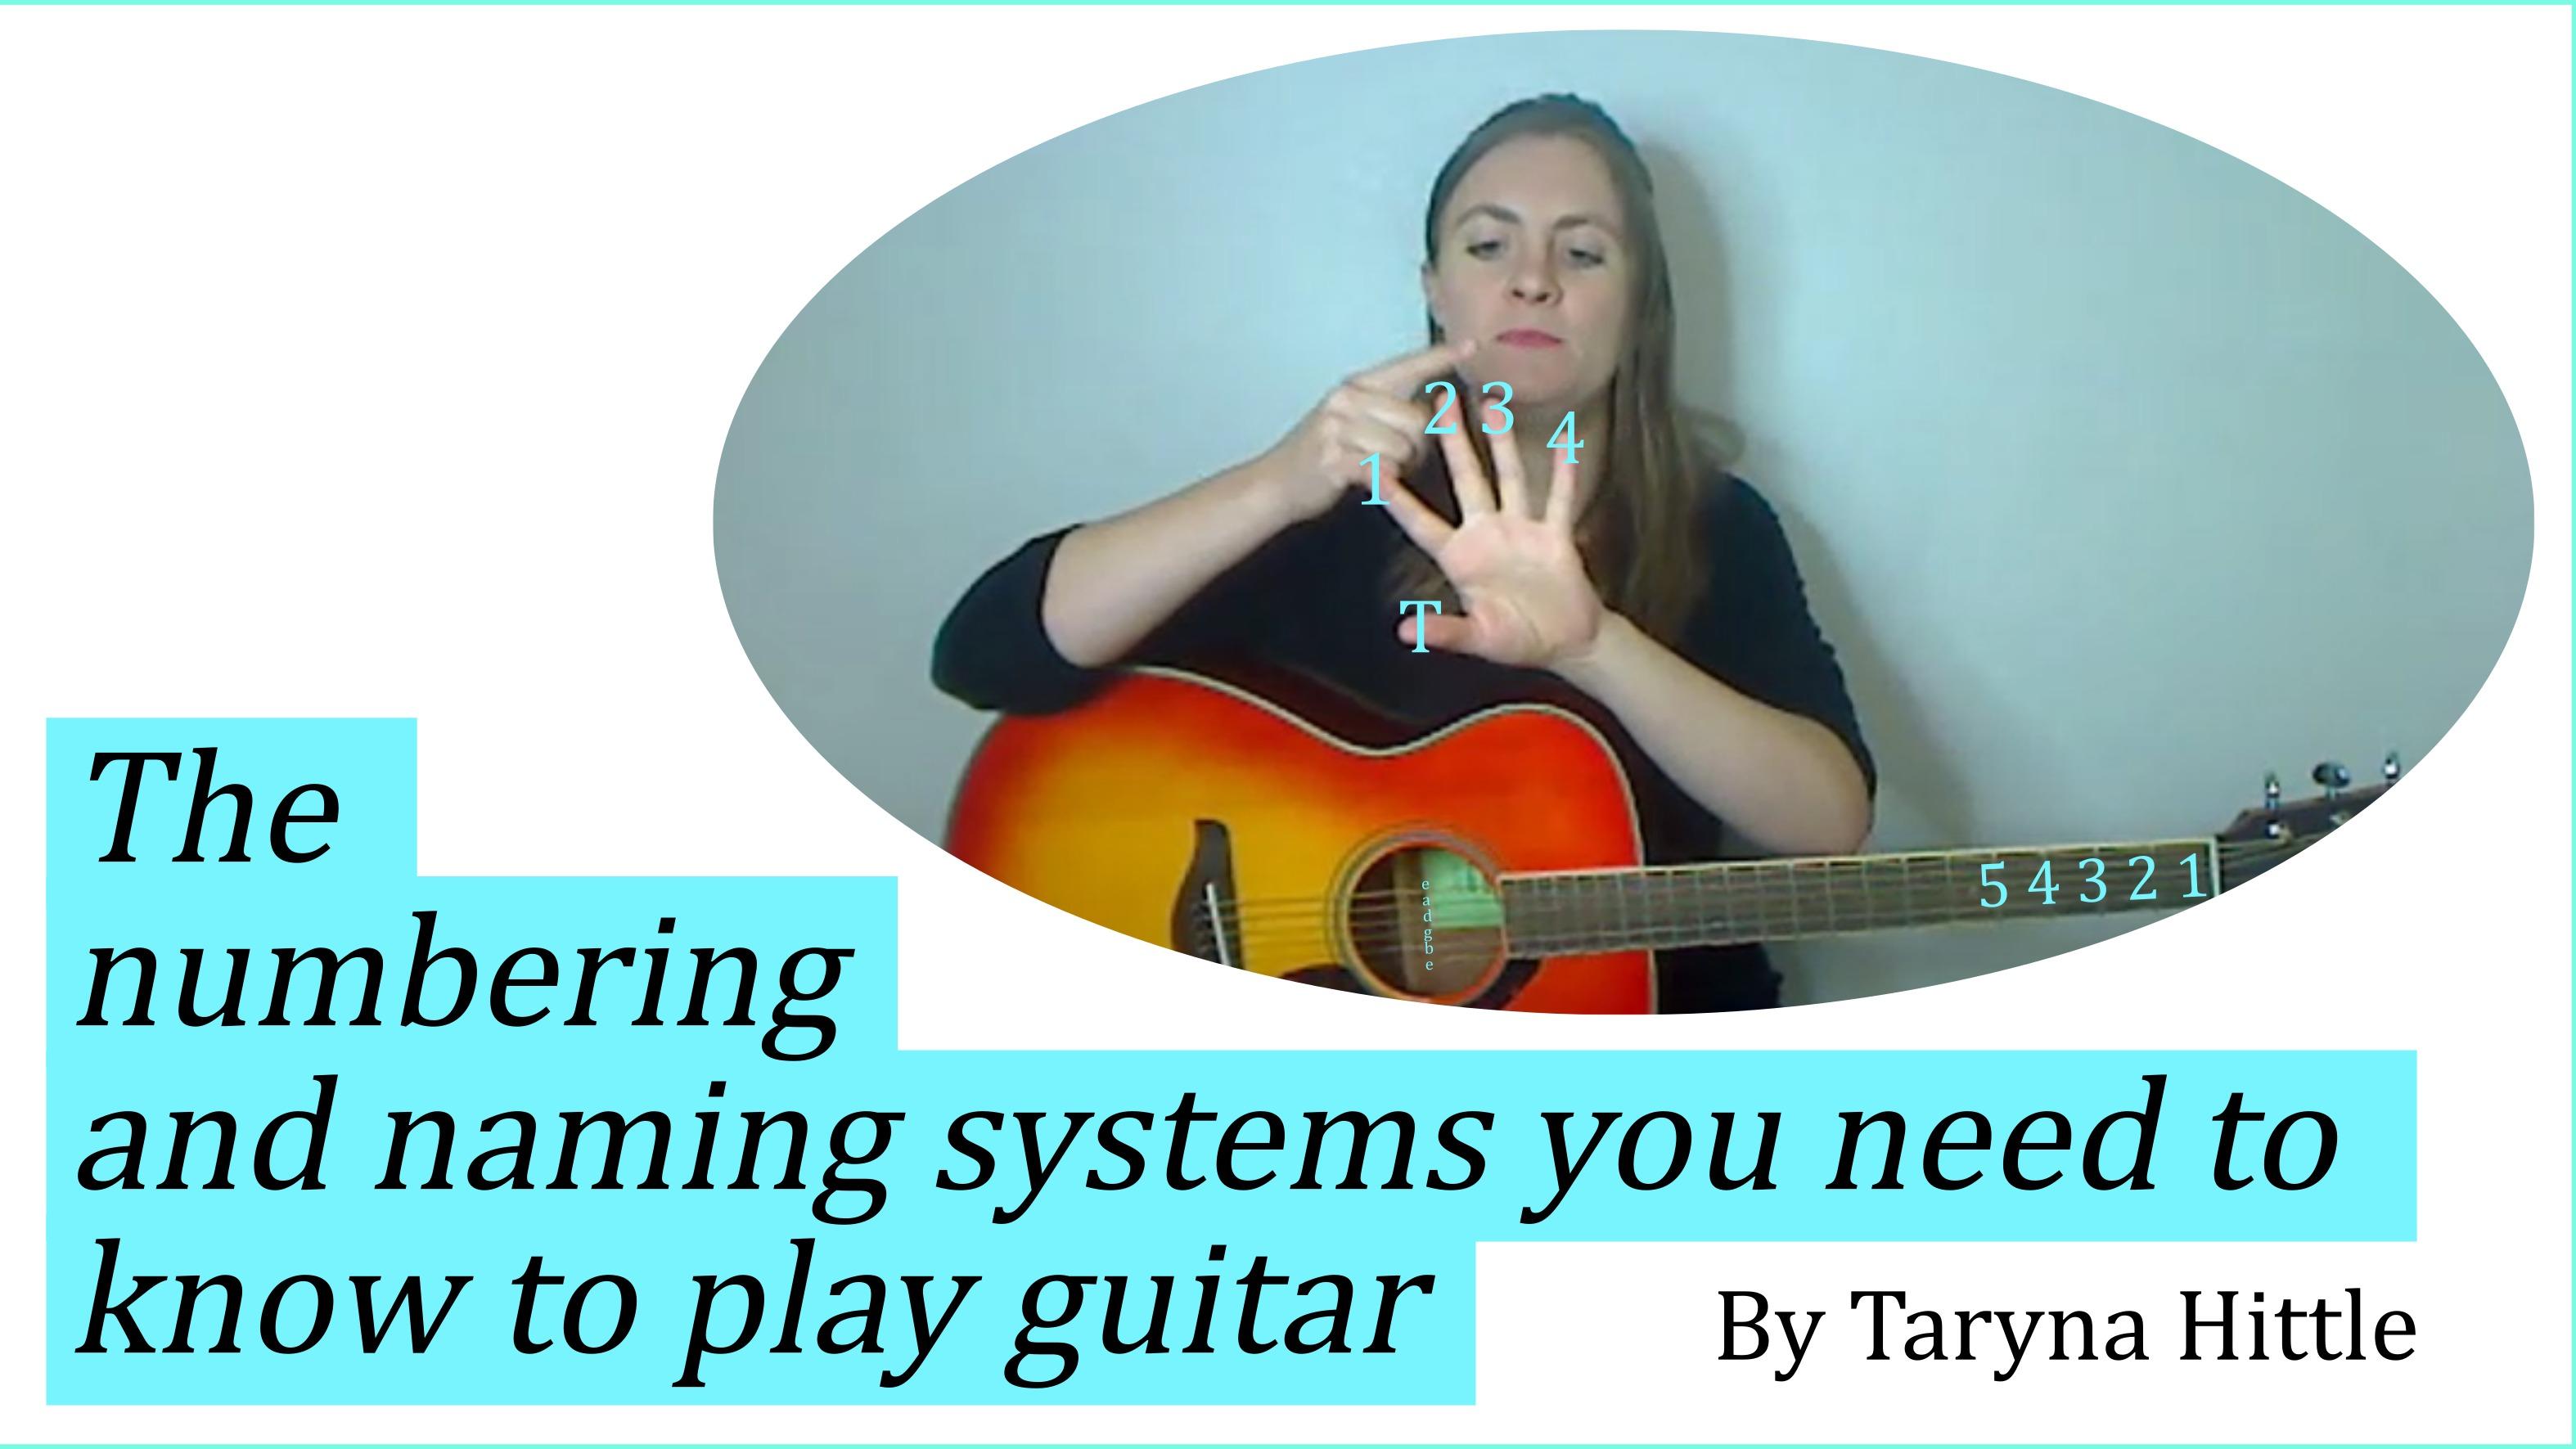 The numbering and naming systems you need to know to play guitar